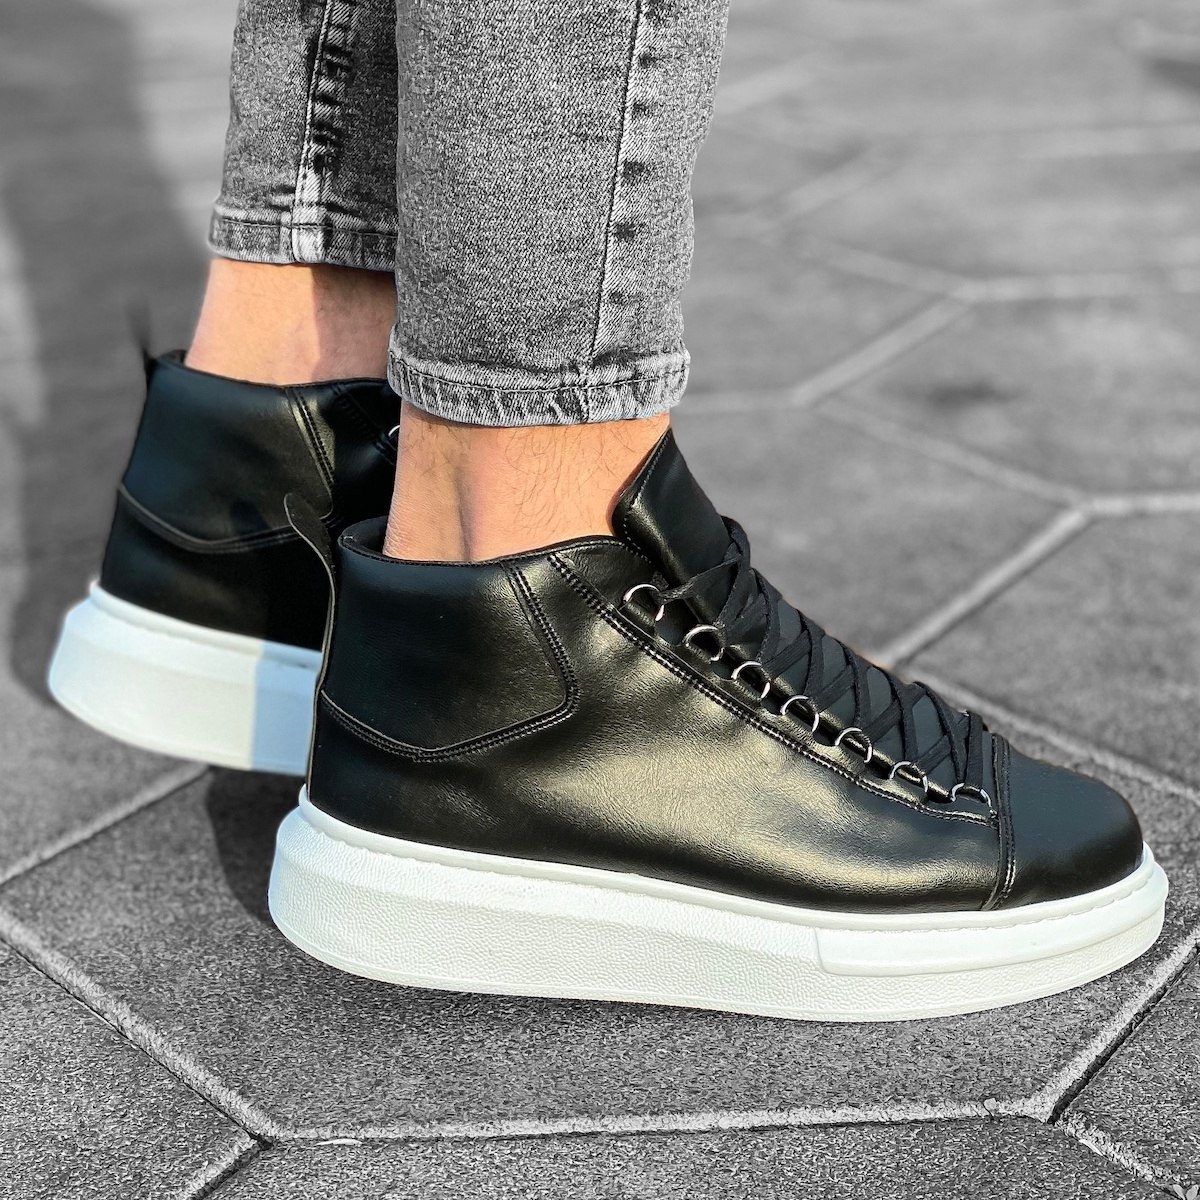 Hype Sole Mox High Top Sneakers In Black | Martin Valen